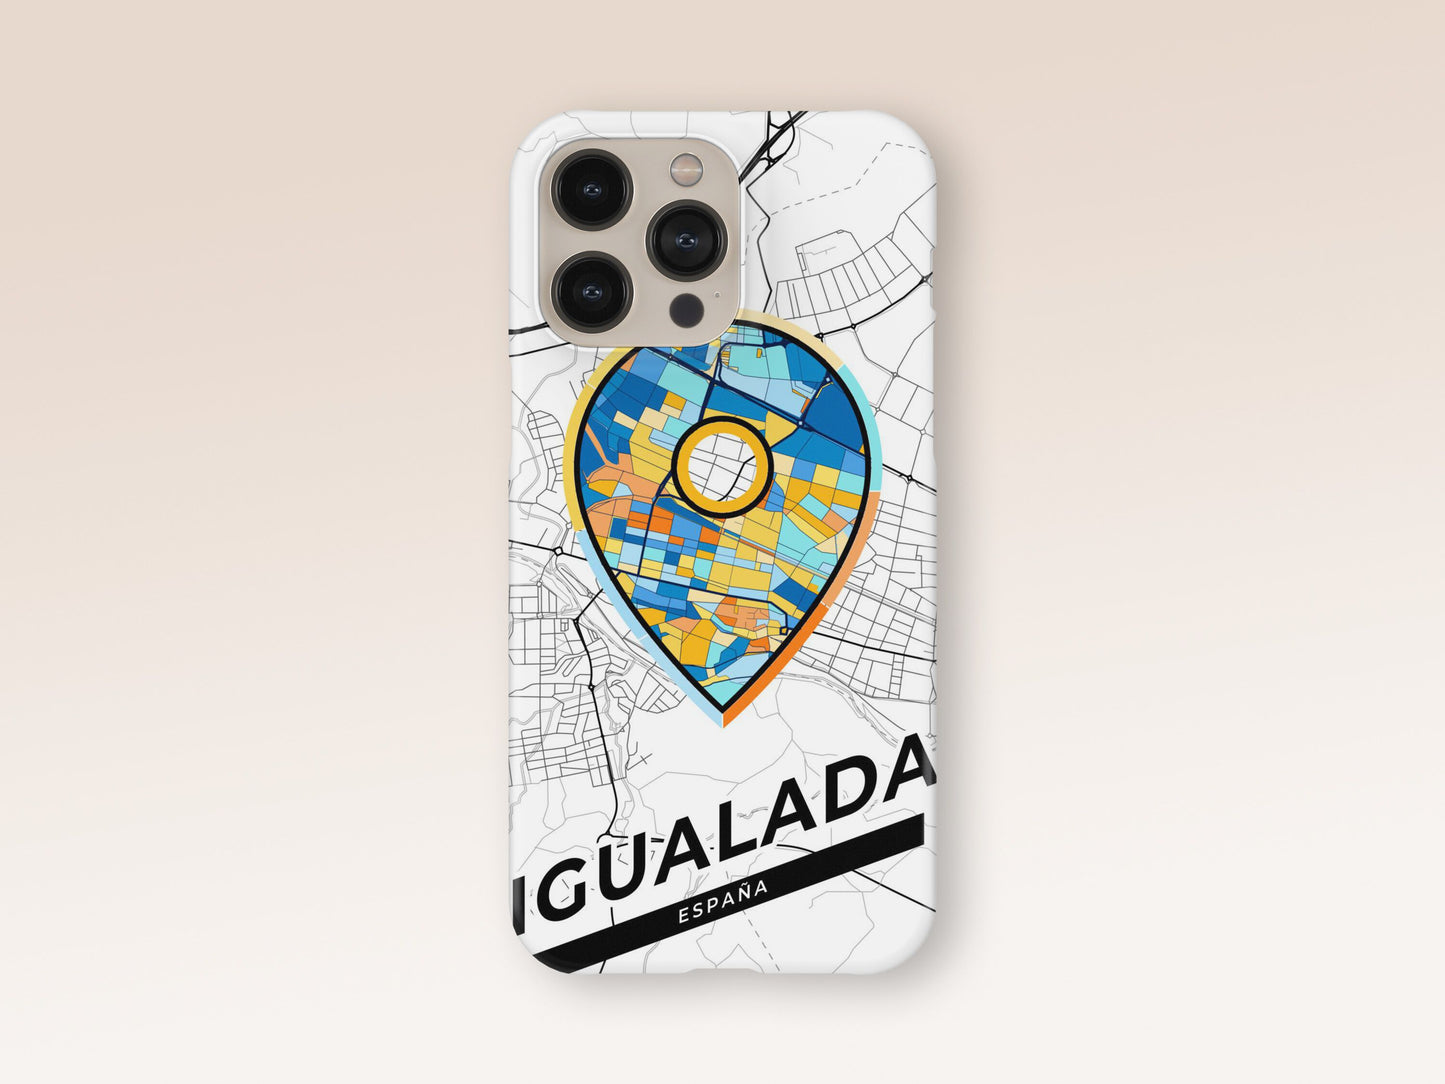 Igualada Spain slim phone case with colorful icon. Birthday, wedding or housewarming gift. Couple match cases. 1